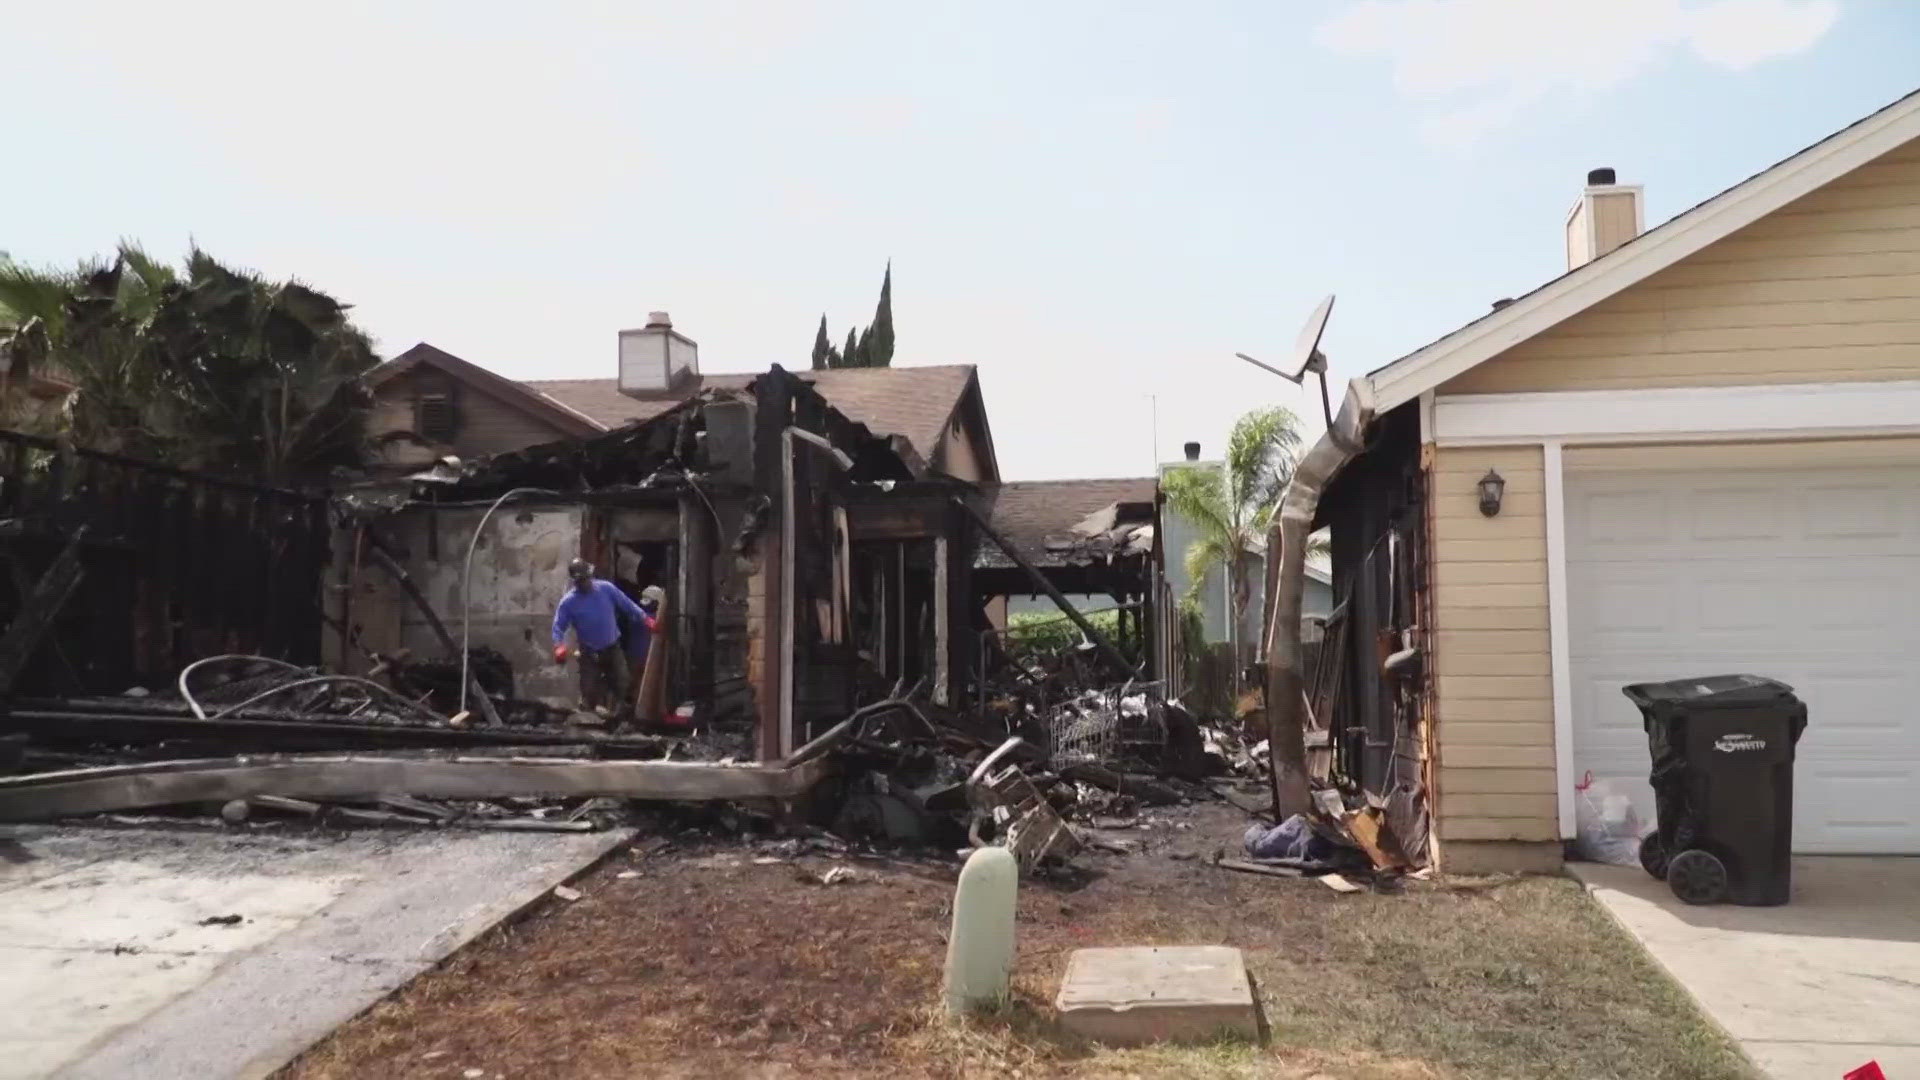 One home was destroyed was destroyed after a Wednesday morning fire. Sacramento Metropolitan Fire District is investigating the incident as arson.